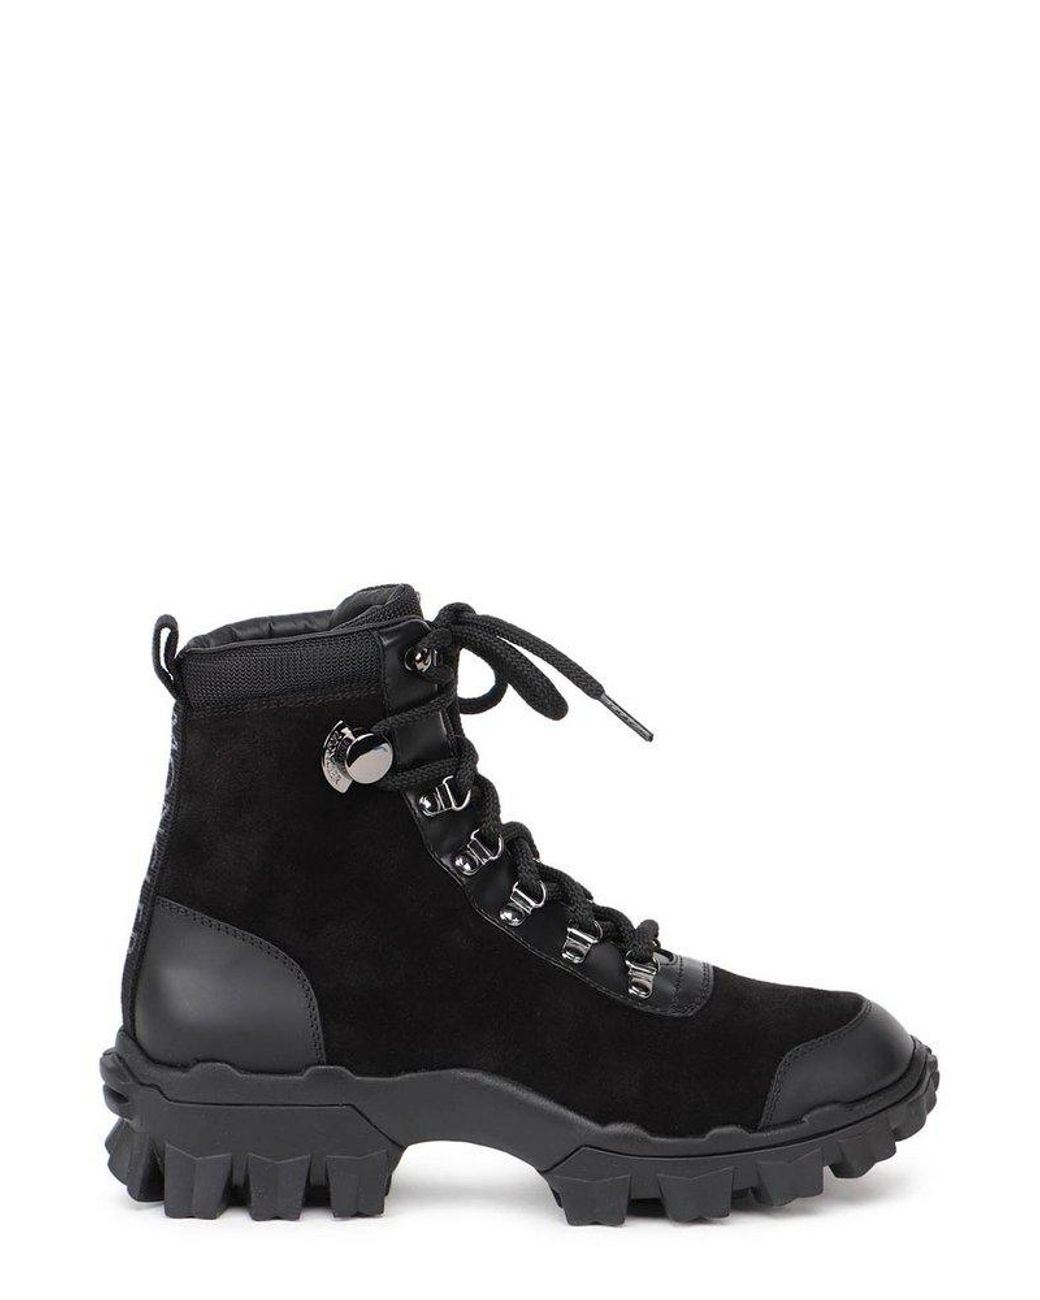 Moncler Helis Hiking Boots in Black | Lyst